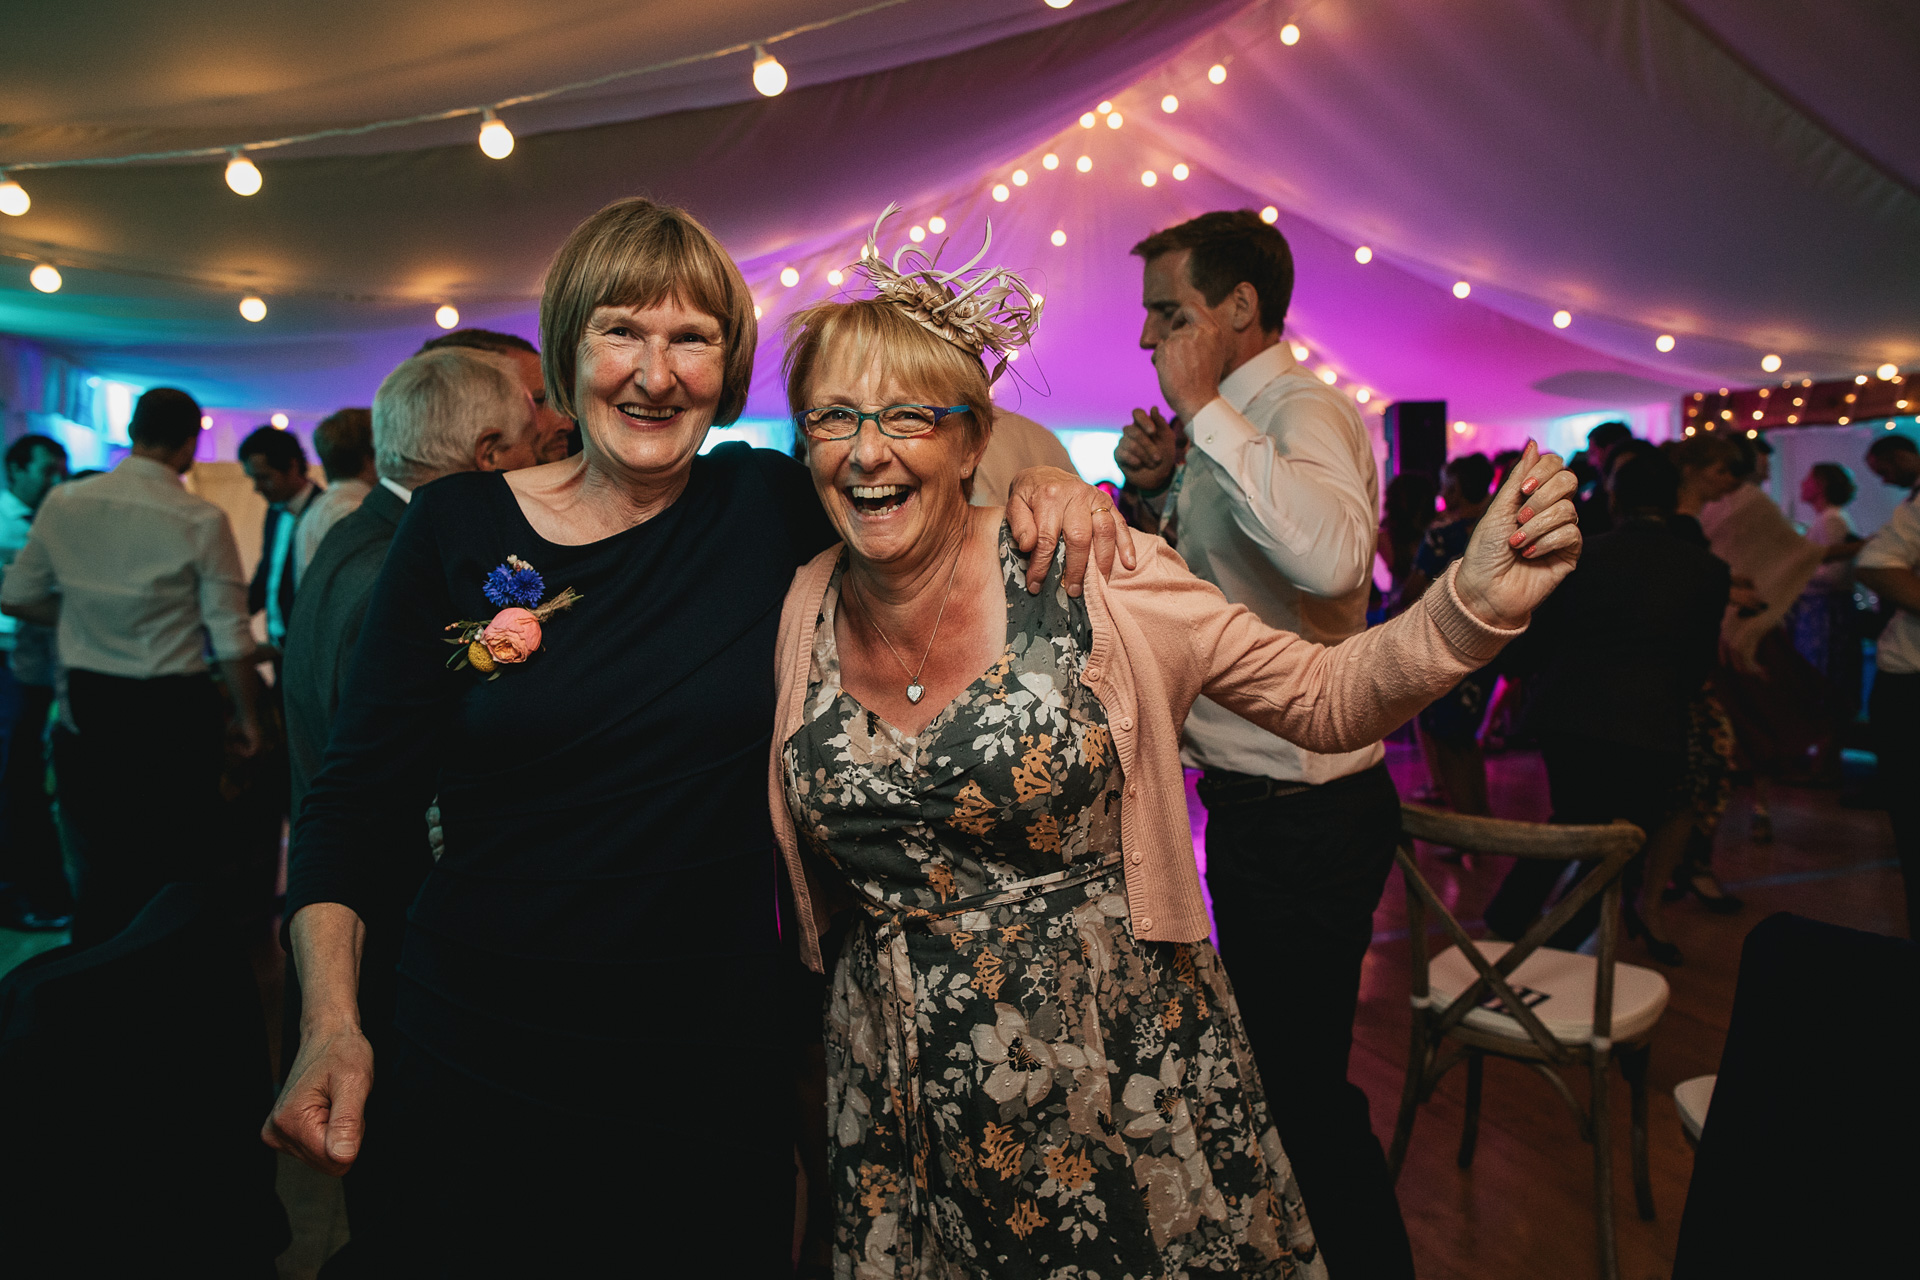 Two women smiling on the dance floor 